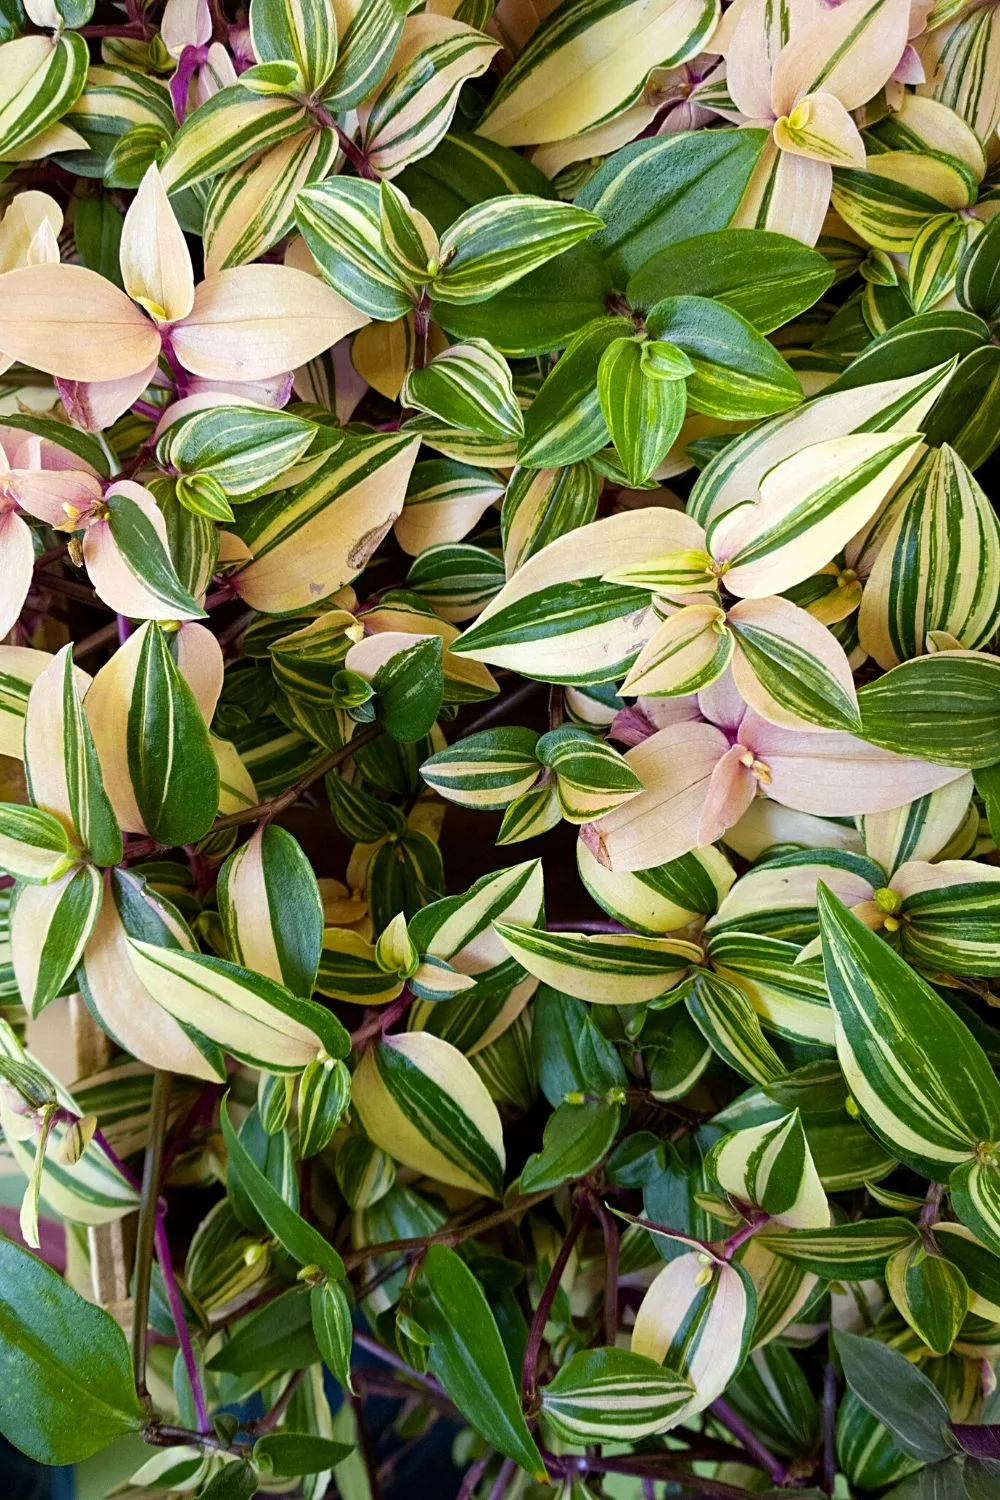 Despite its stunning variegated leaves, Tradescantia is one of the plants that hard to grow